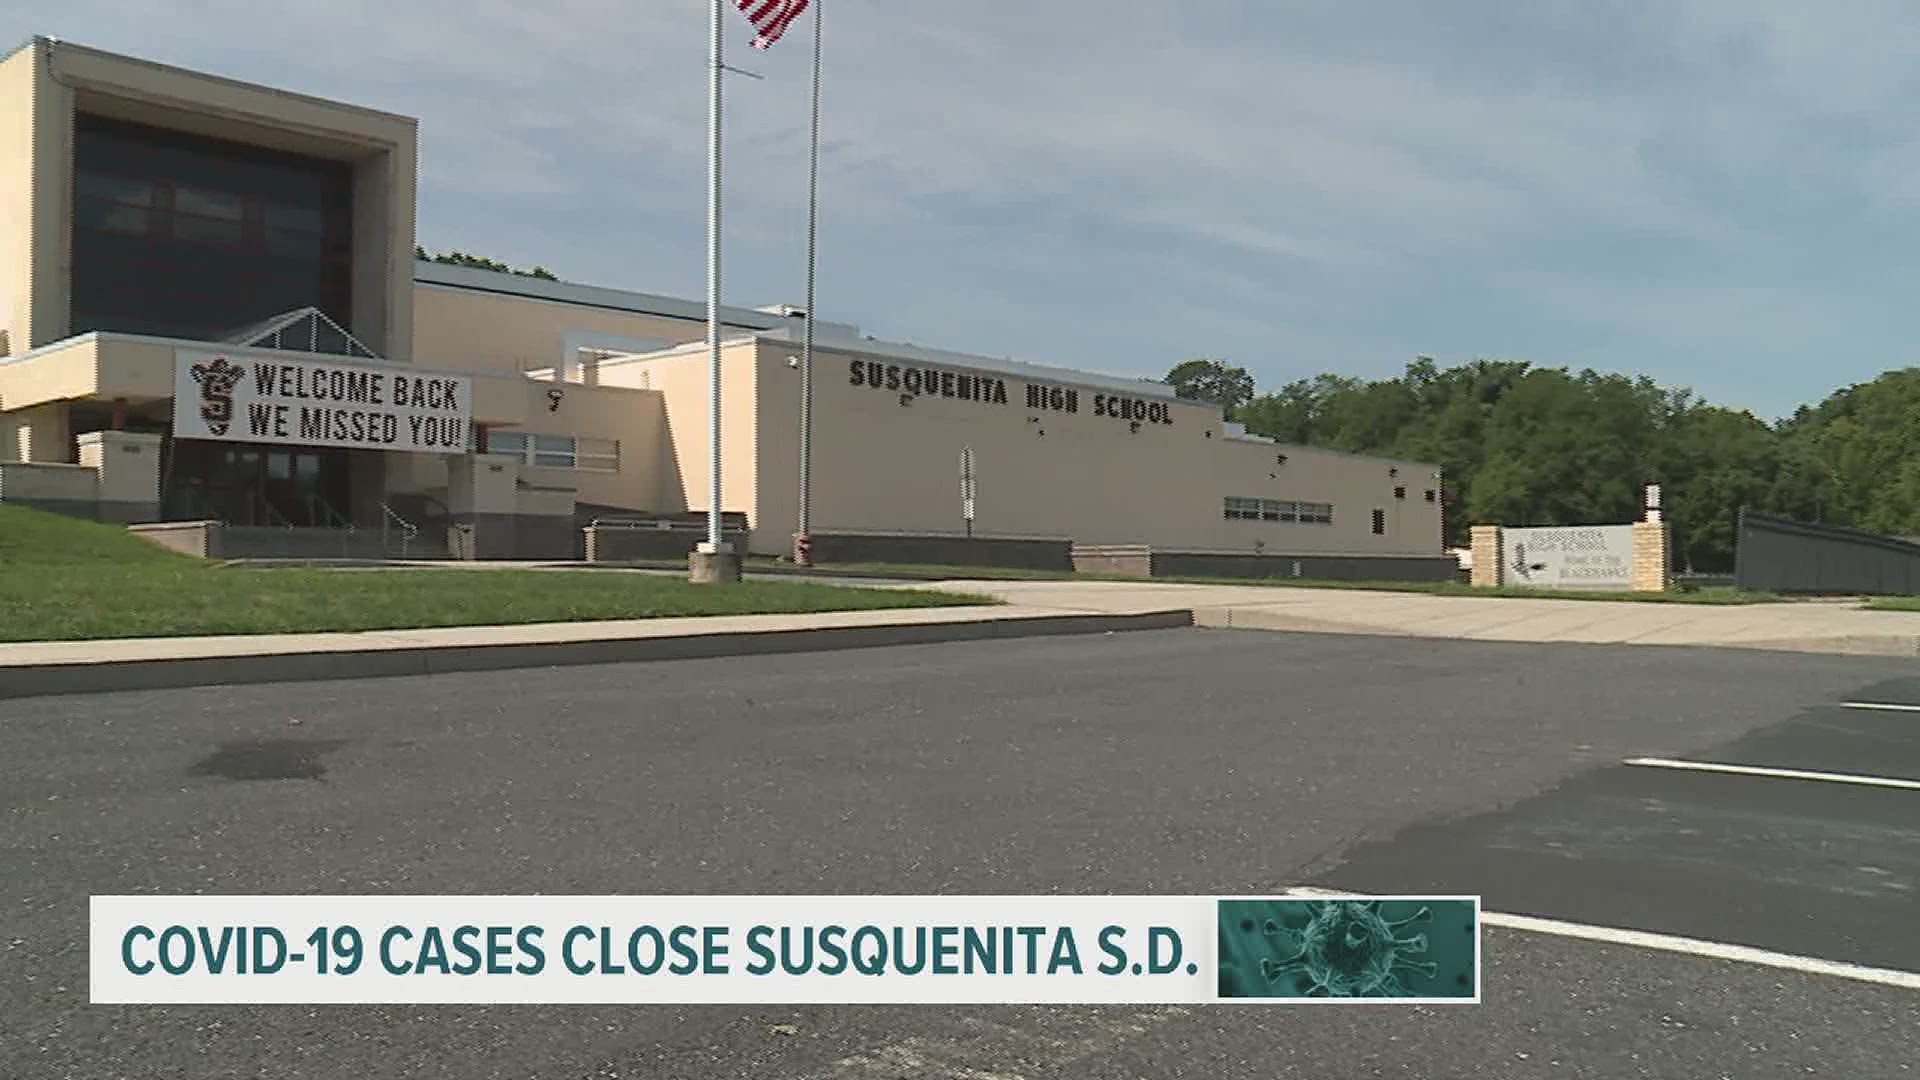 Susquenita School District is closed until August 31st because of COVID-19 two days into the new school year